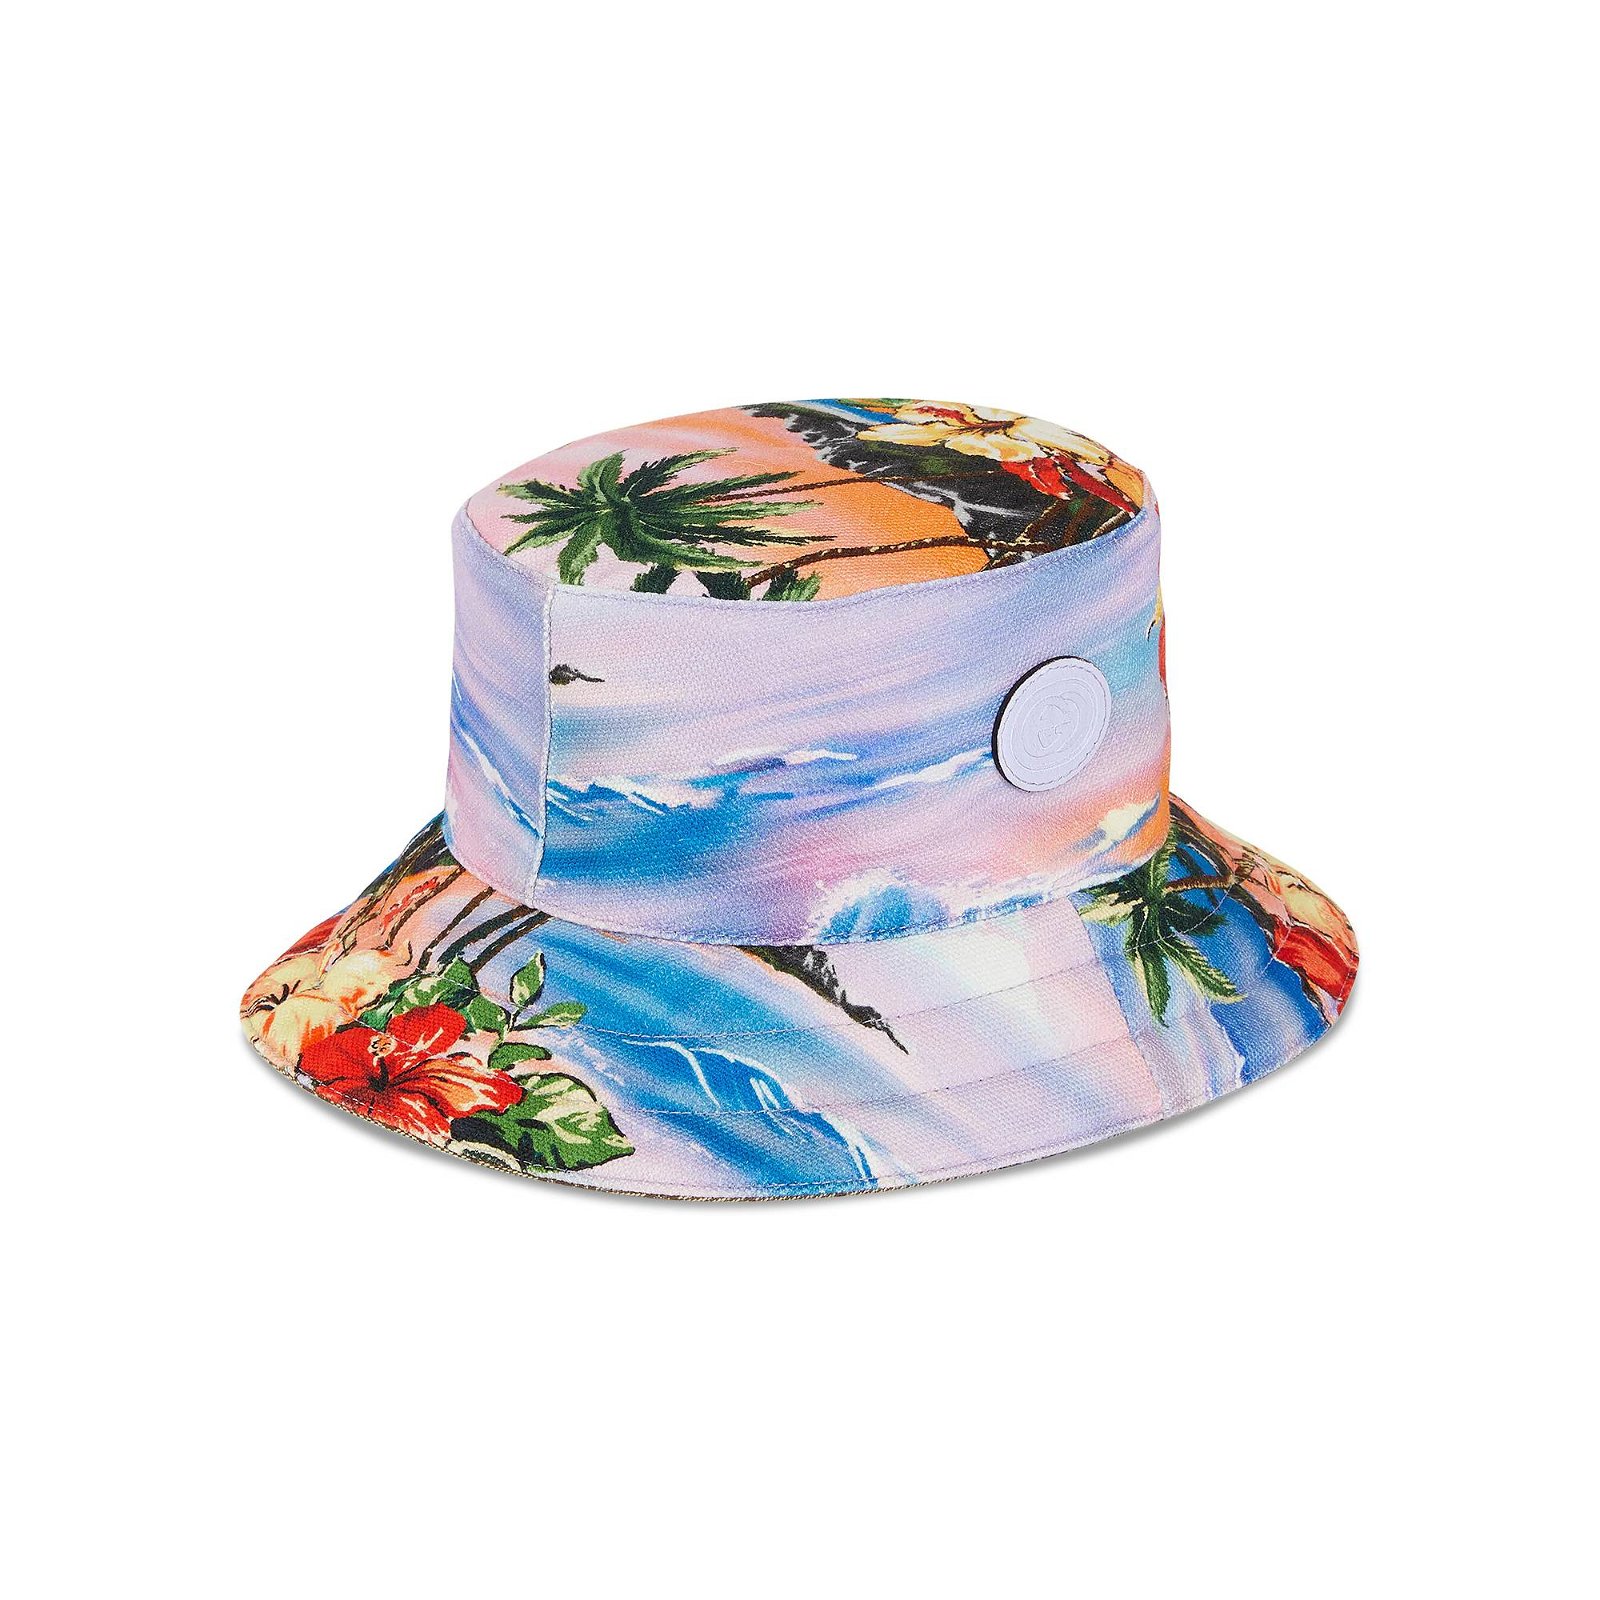 LUXURY SHOPPING - GUCCI reversible bucket hat in GG canvas and